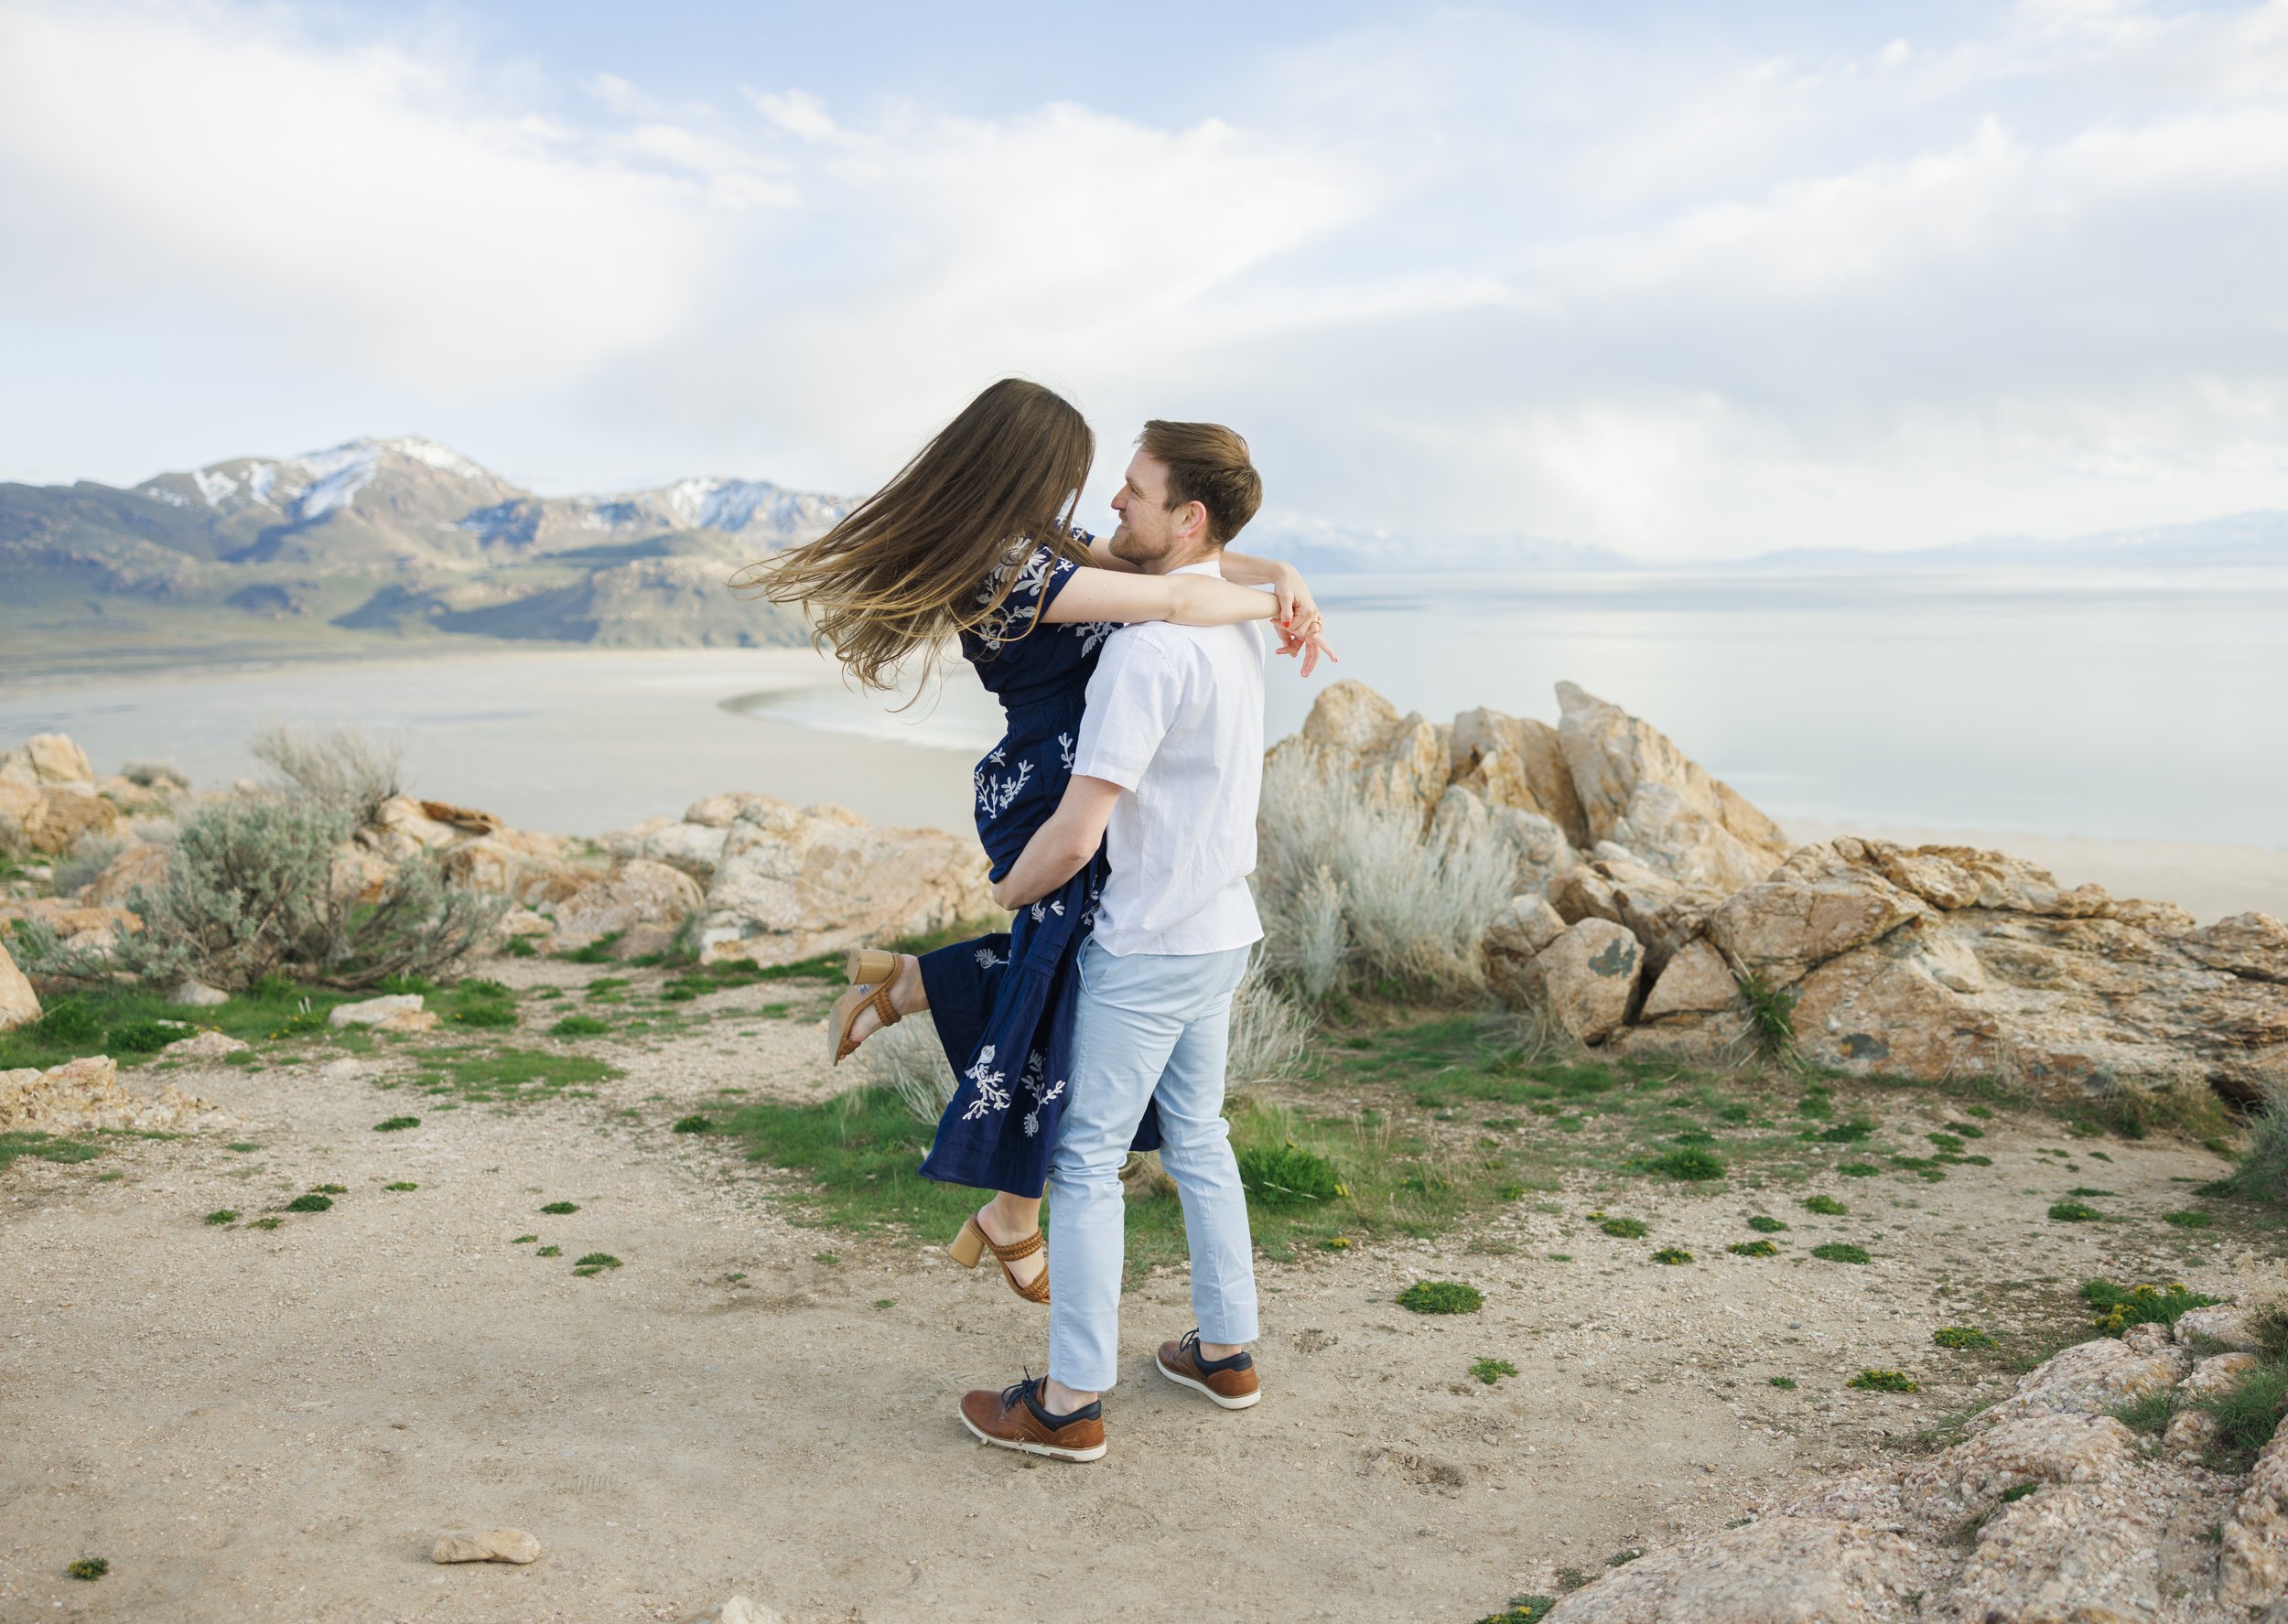  A woman pops her leg up while being picked up by her fiance on the top of Antelope Island by Savanna Richardson Photography. Outdoor engagements breathtaking backdrops #SavannaRichardsonPhotography #SavannaRichardsonEngagements #UtahEngagements #Ant